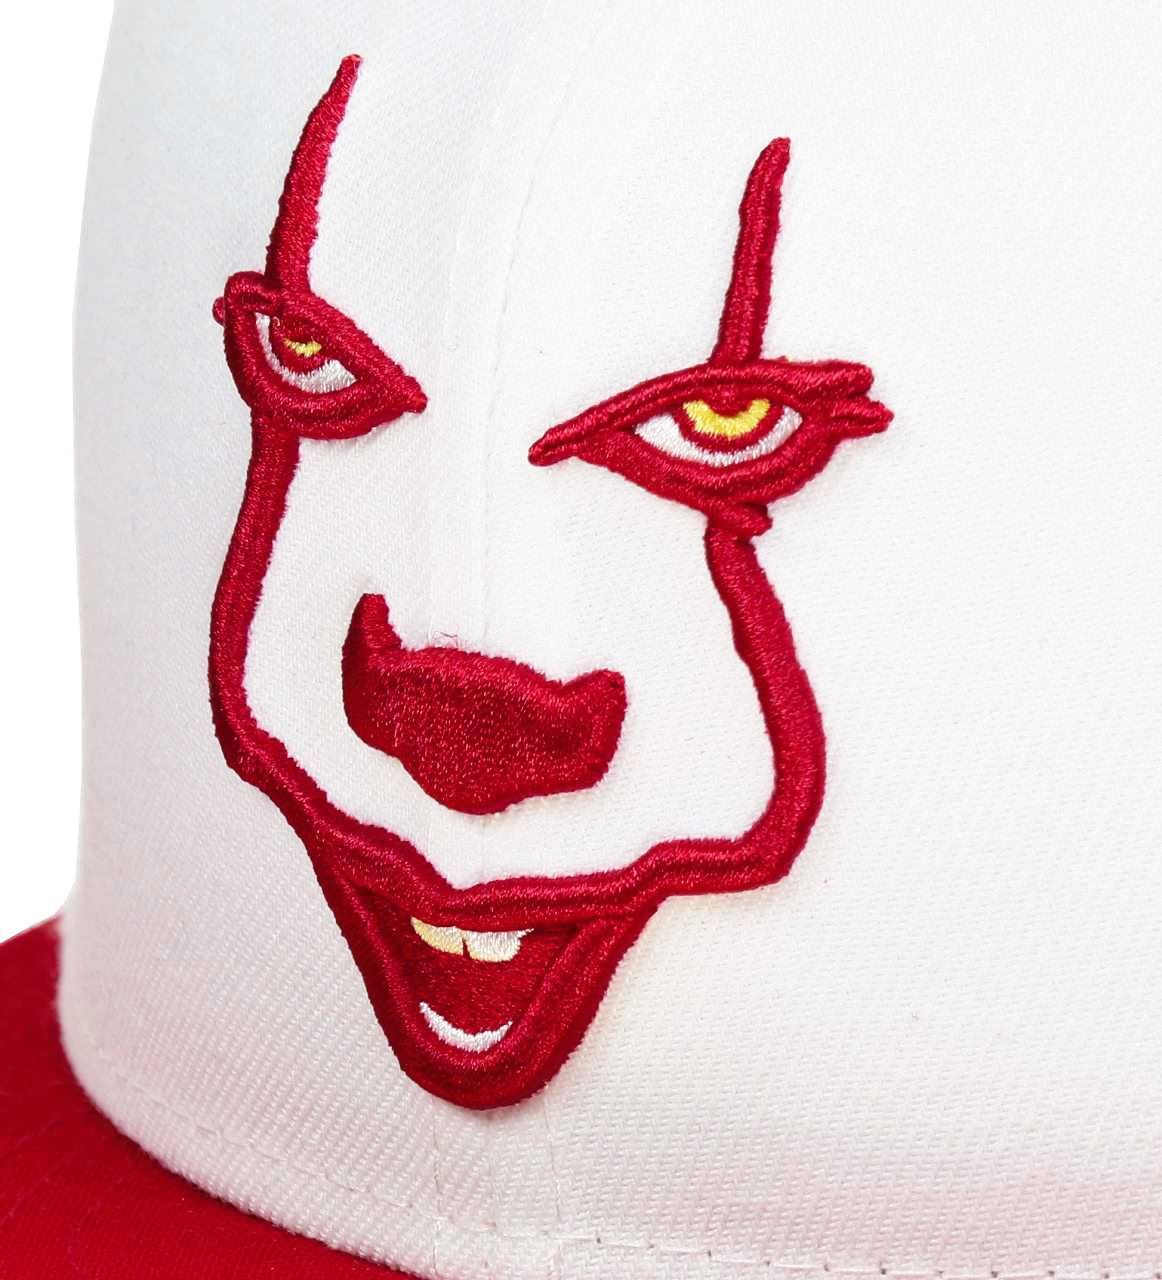 It the Clown Collection 59Fifty Basecap New Era 